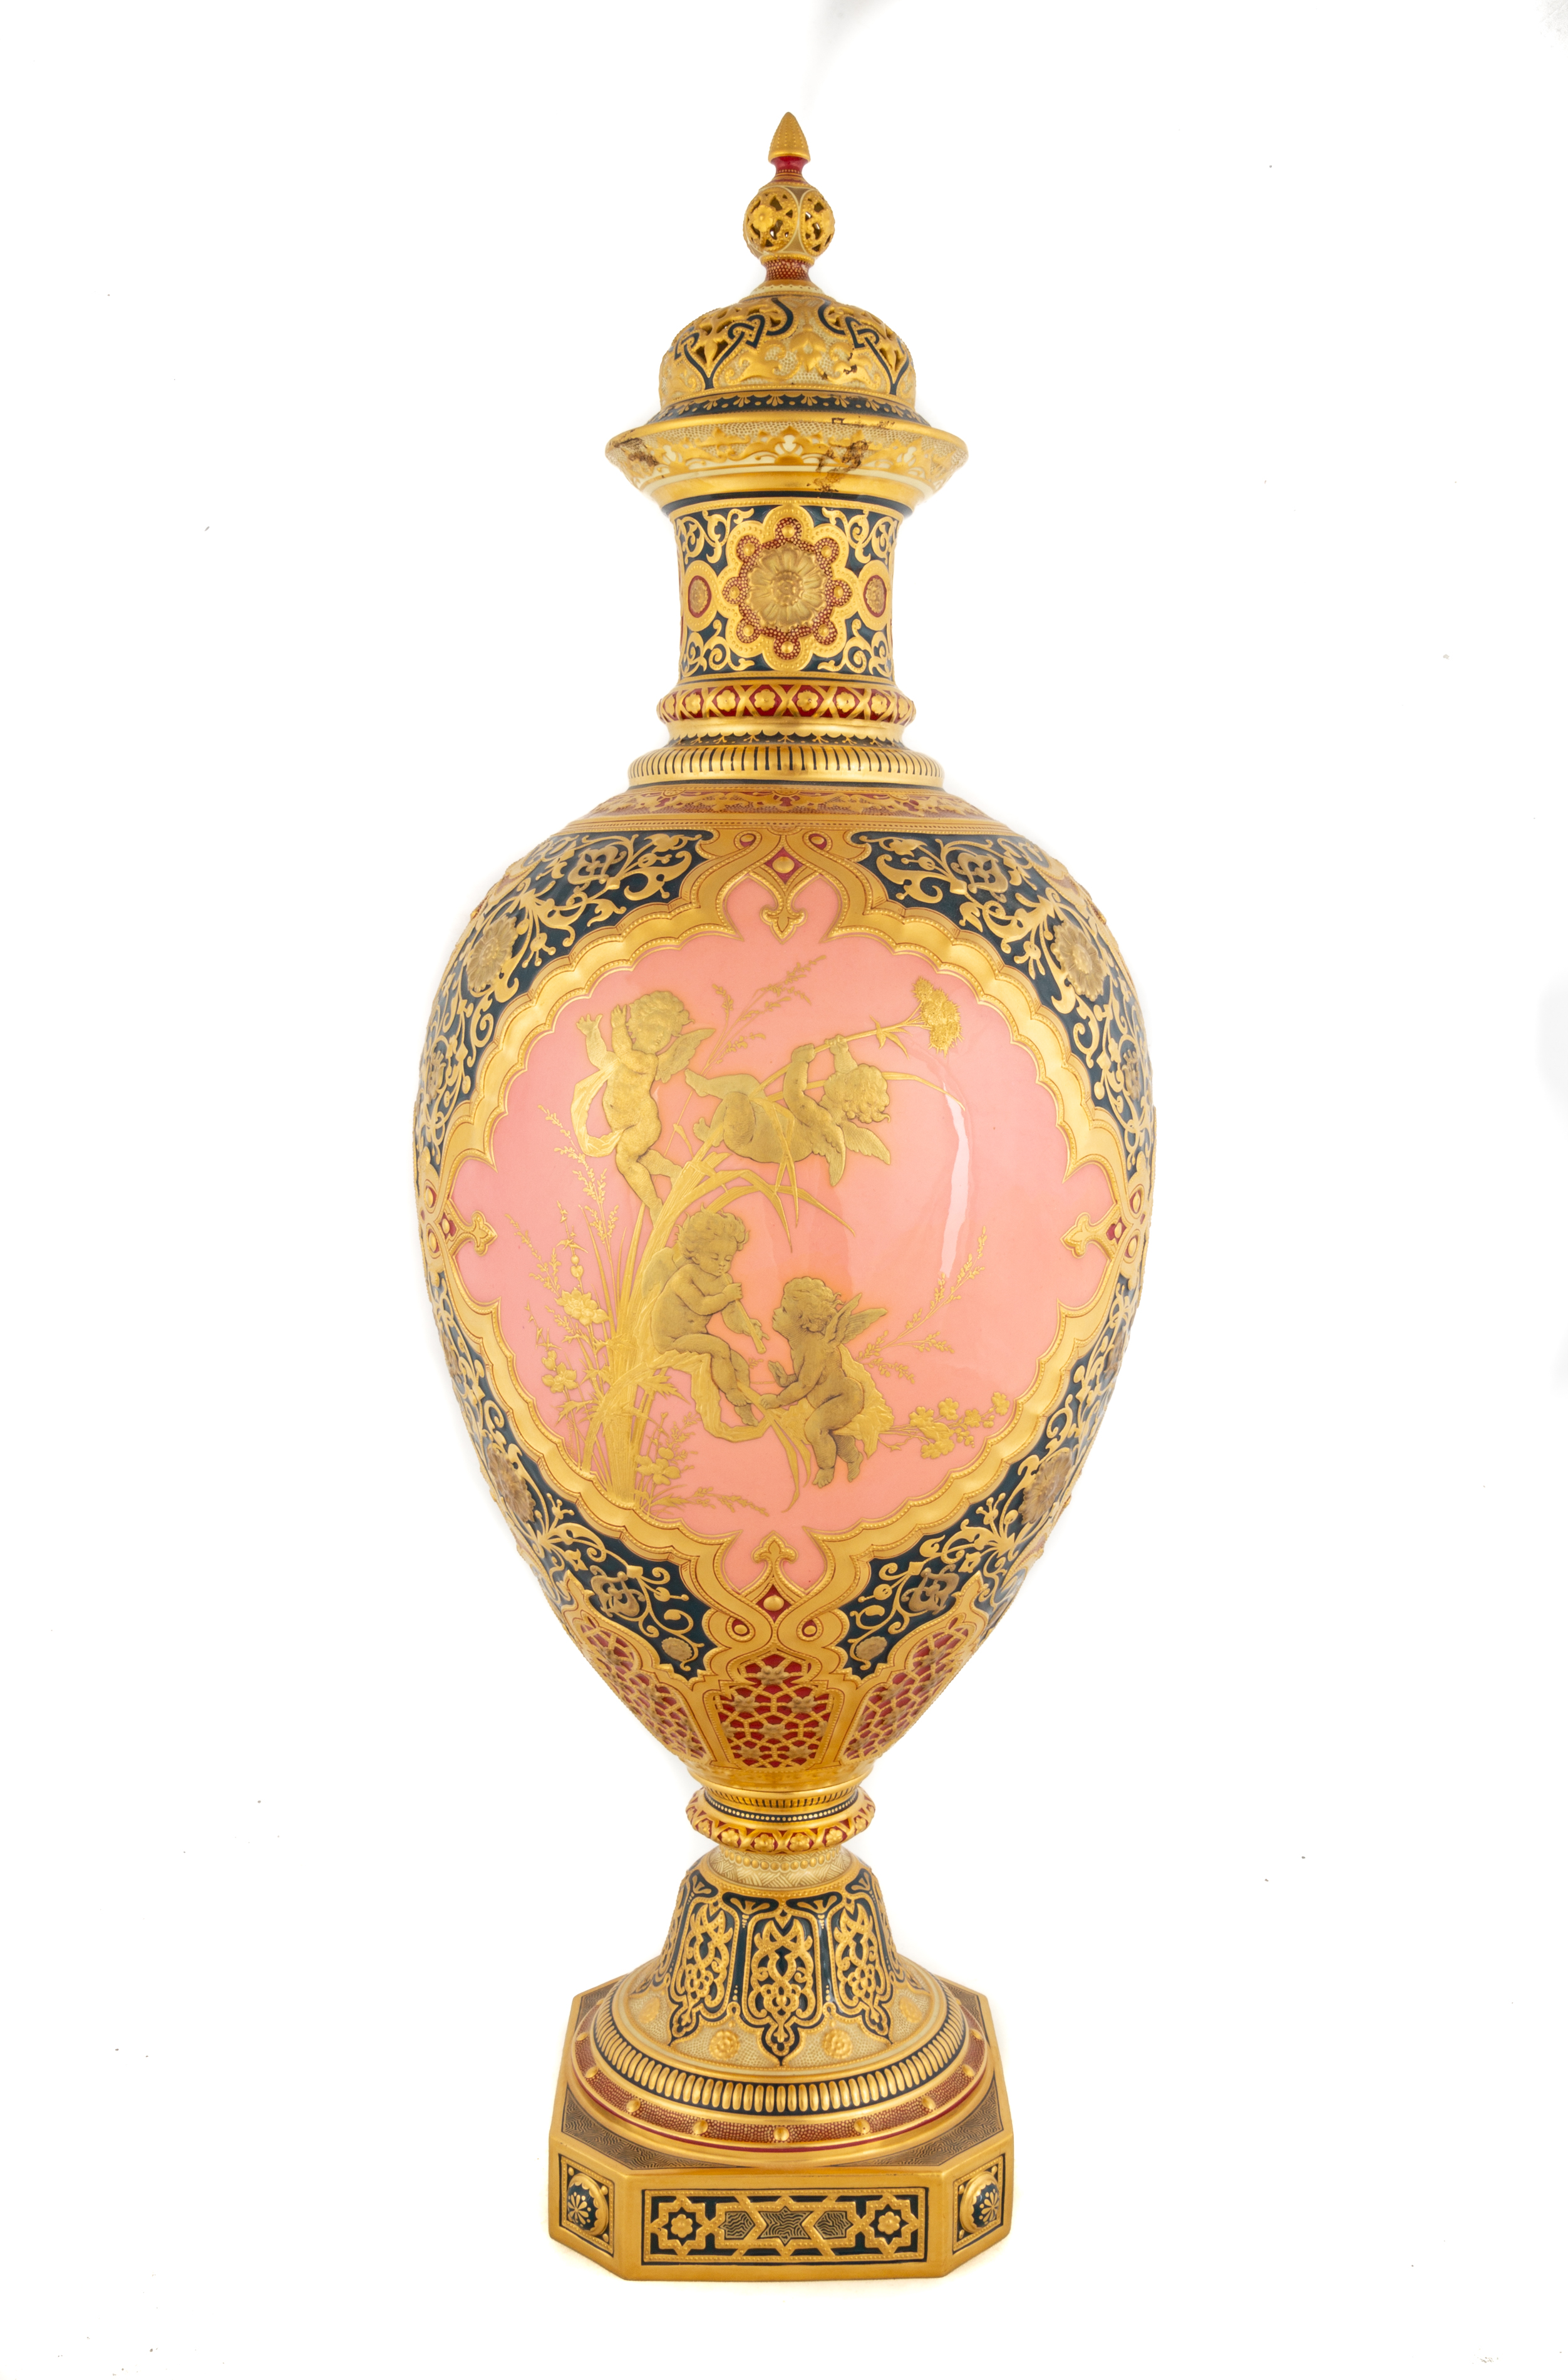 ROYAL CROWN DARBY COVERED URN 19th 2c867d